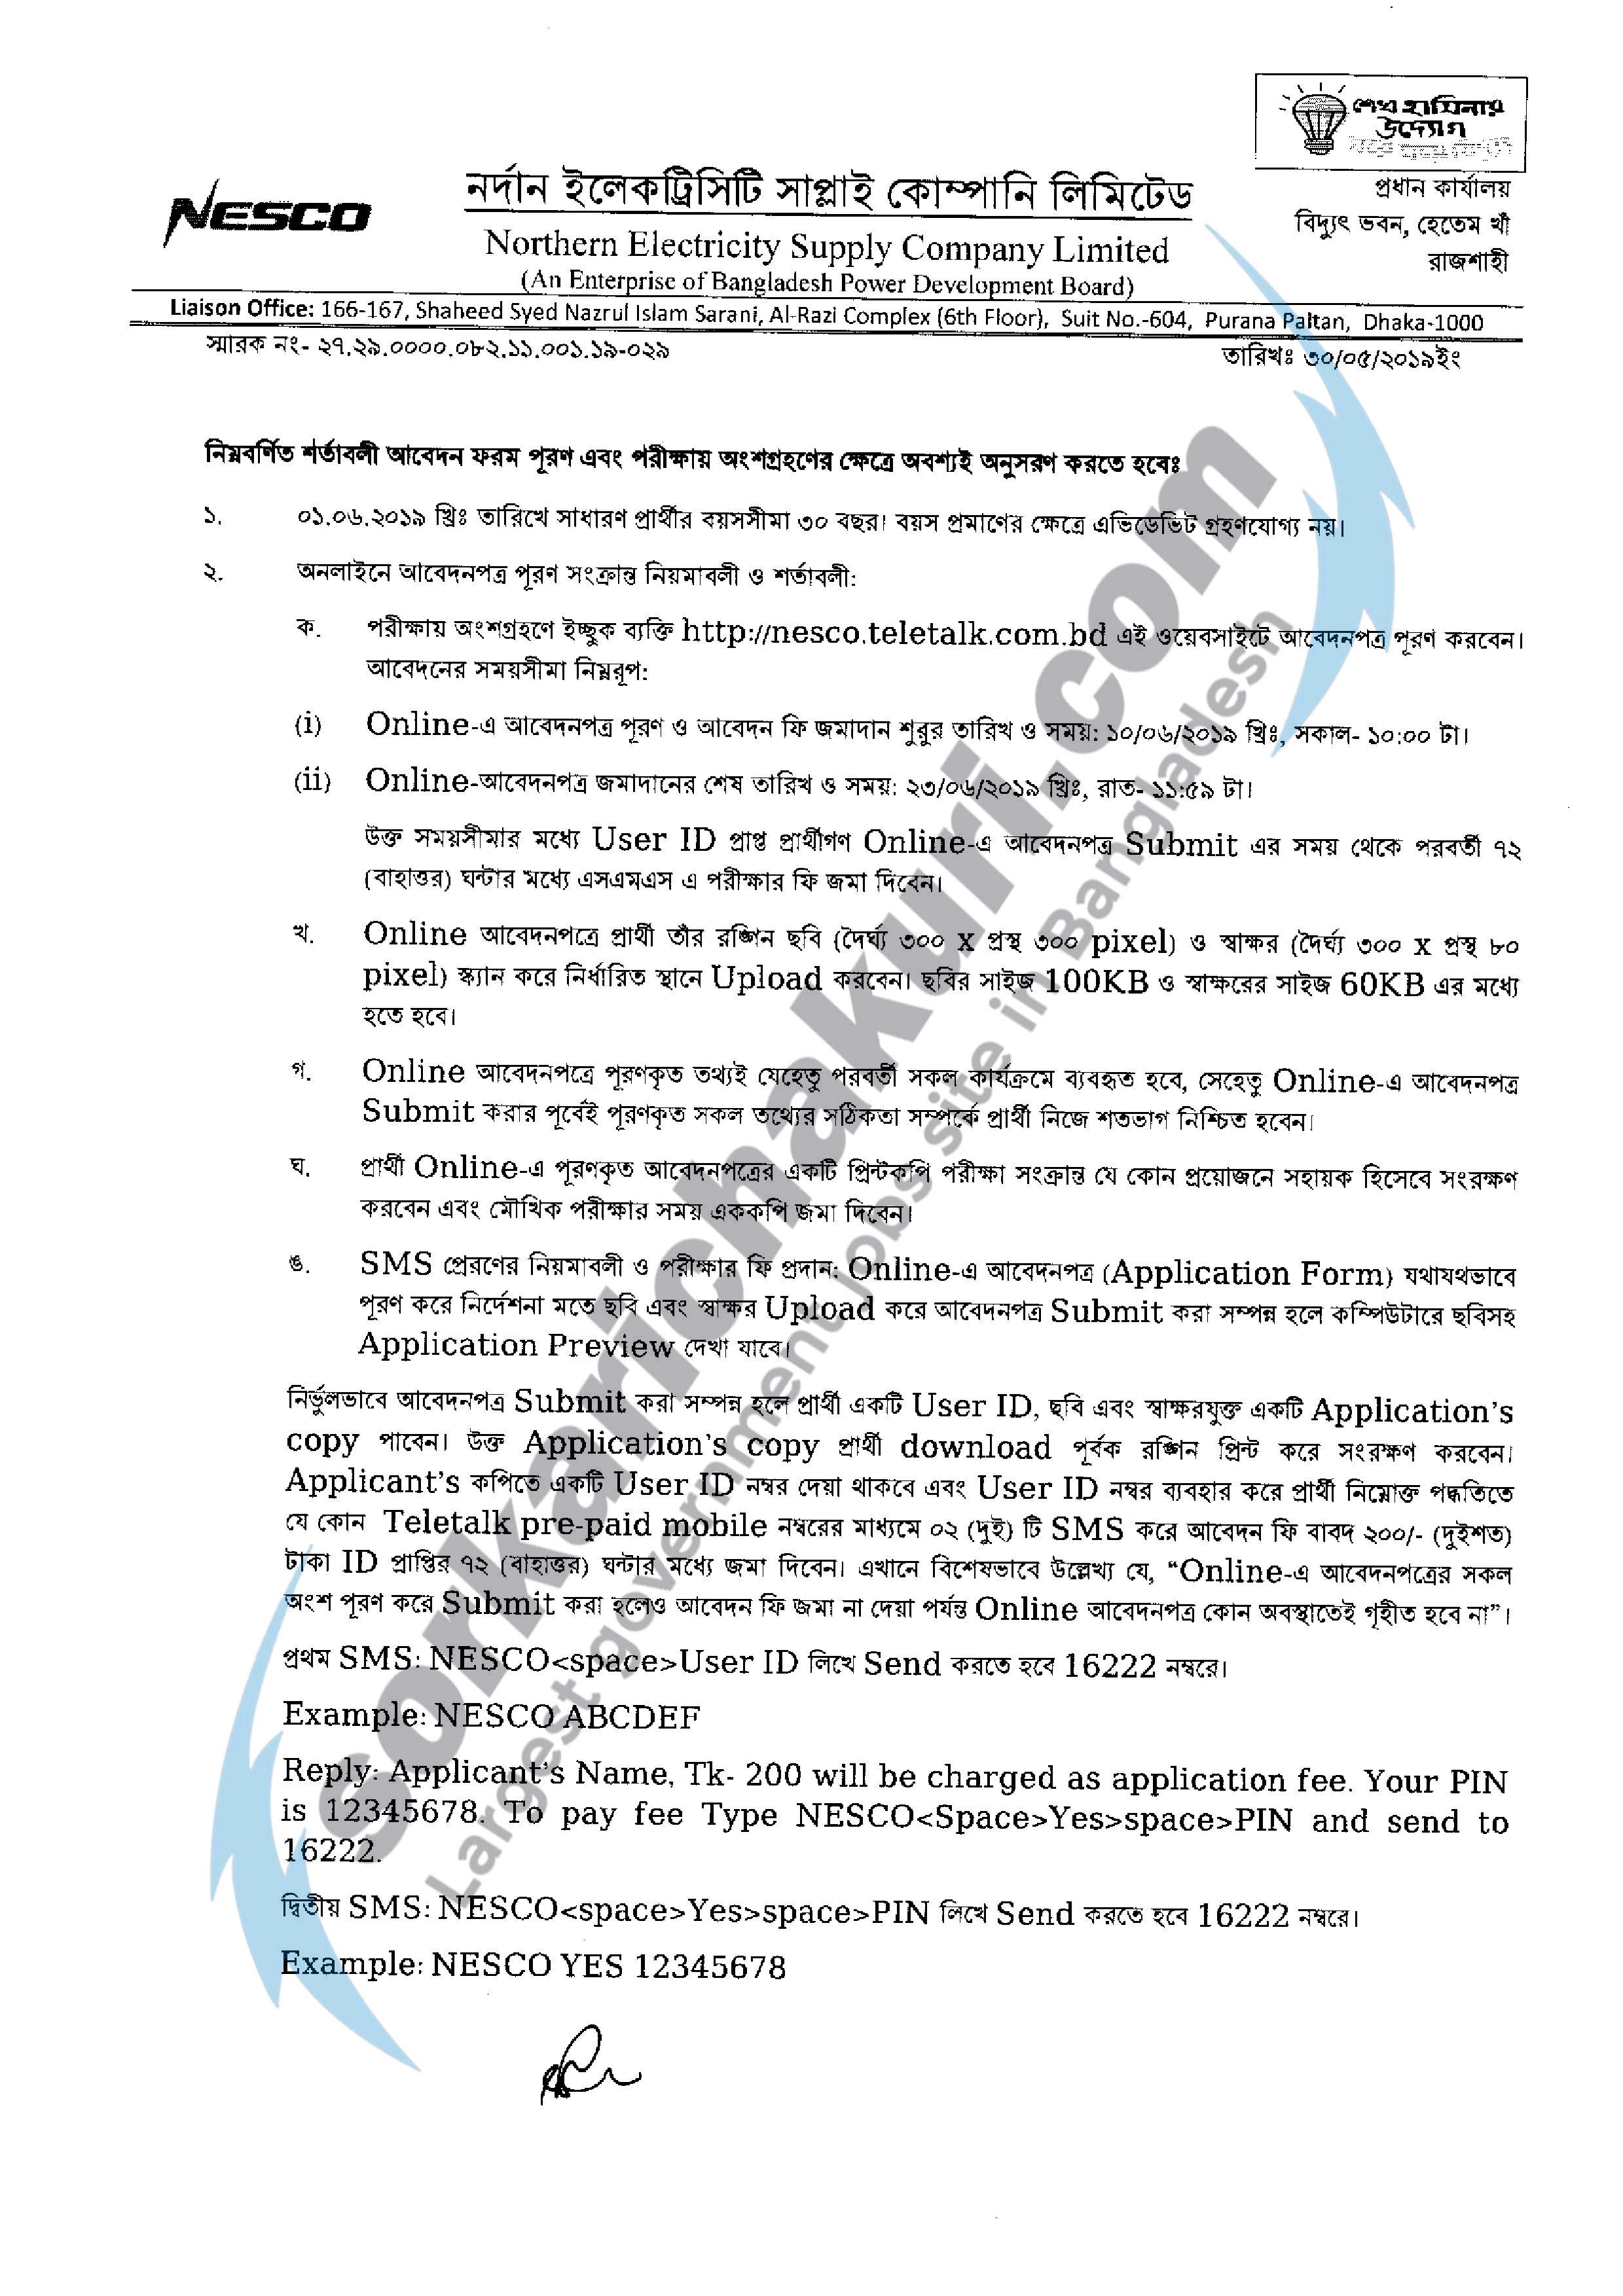 Northern Electricity Supply Company (NESCO) Limited Jobs Circular 2019